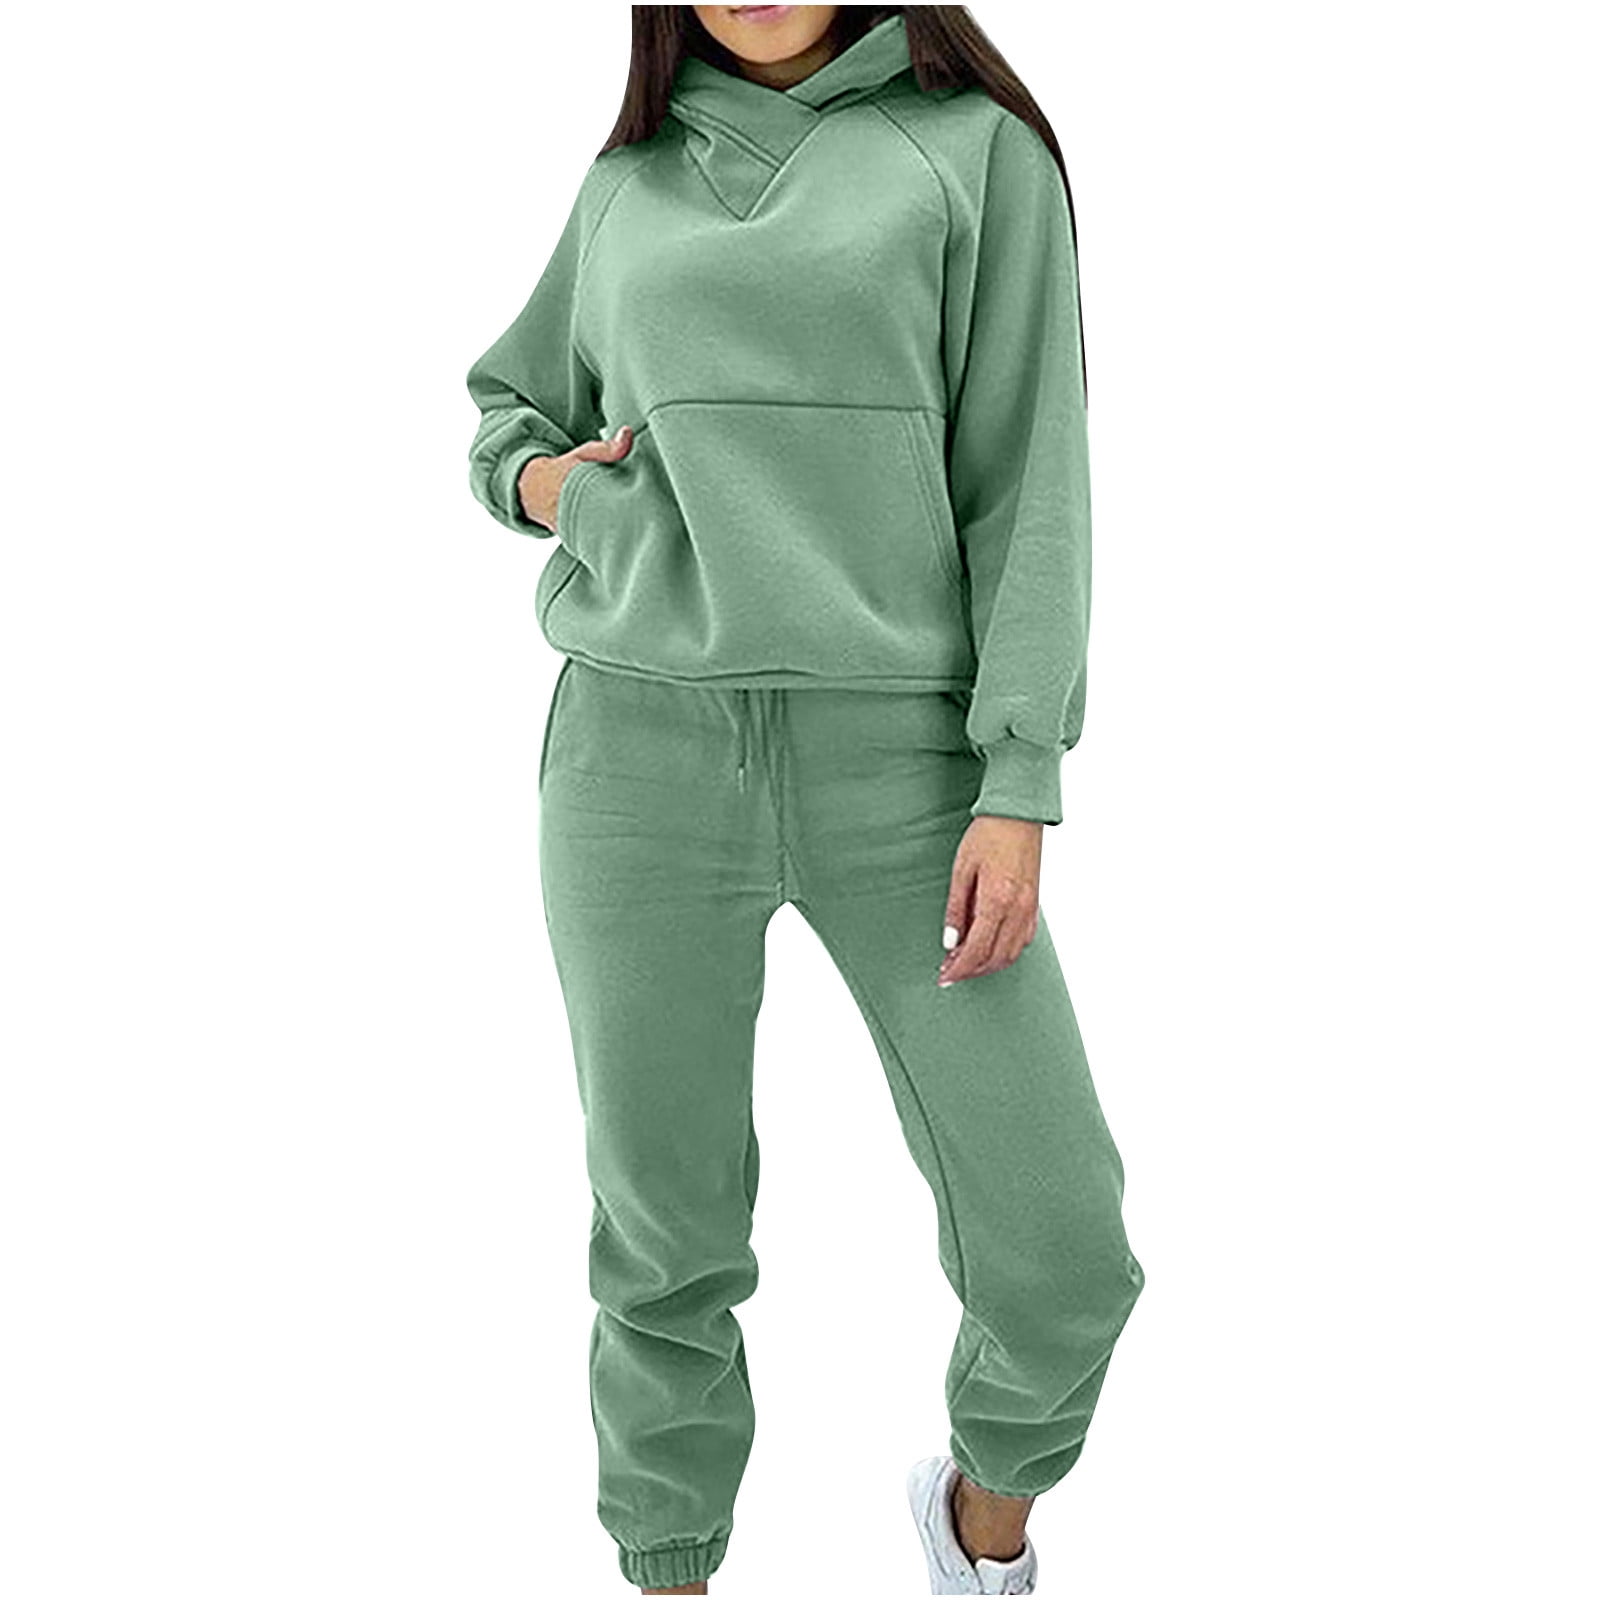 Tracksuit Womens Full Set Sale Clearance,Ladies Hoodies and Jogging Bottoms  Tracksuits Teenager Girls Track Suit Loungewear Running Sweat Suit Walking  Hiking Yoga Gym Set 